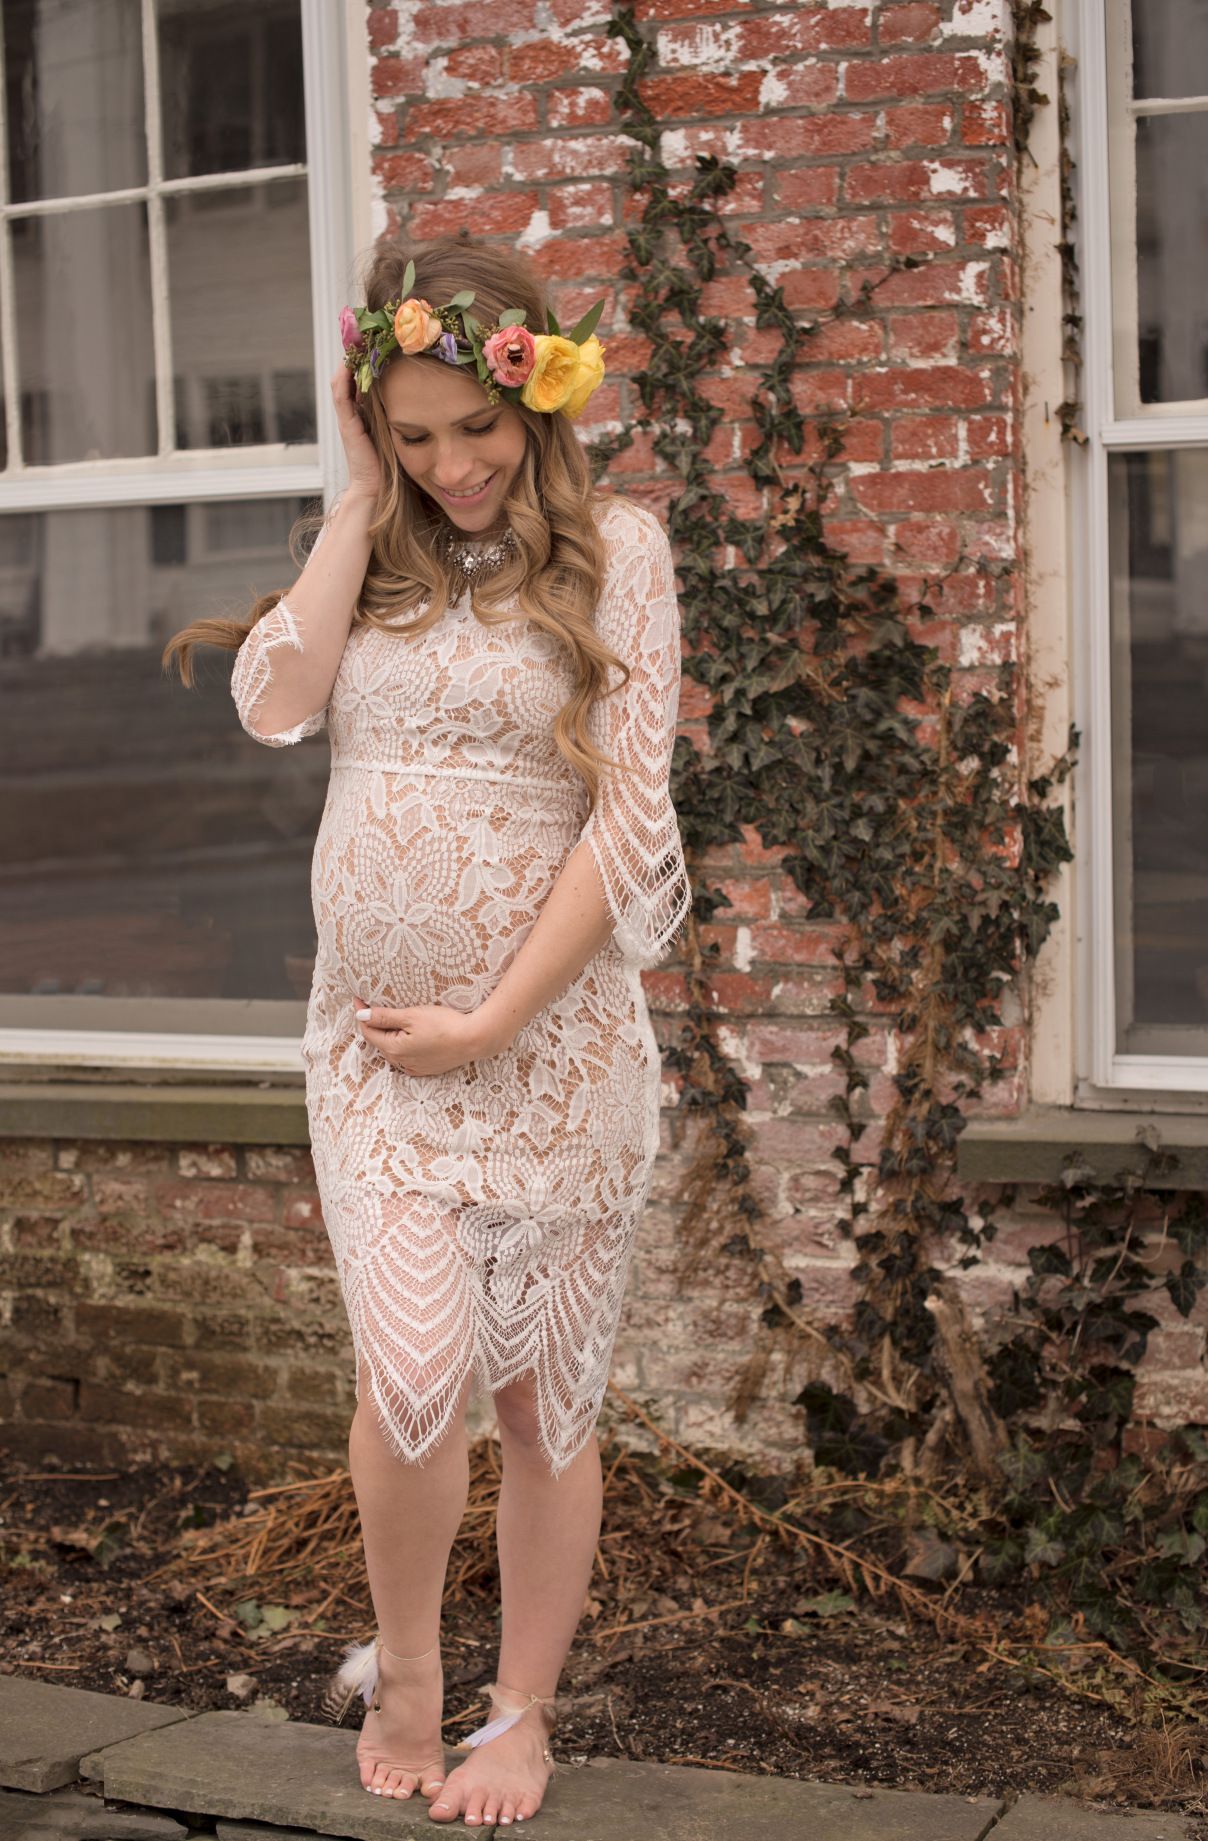 Full Size of Baby Shower:baby Shower Dresses Trendy Affordable Maternity Clothes Inexpensive Maternity Clothes Maternity Dresses For Photoshoot Baby Shower Dresses Cute Inexpensive Maternity Clothes Maternity Evening Gowns Plus Size Maternity Dresses For Baby Shower